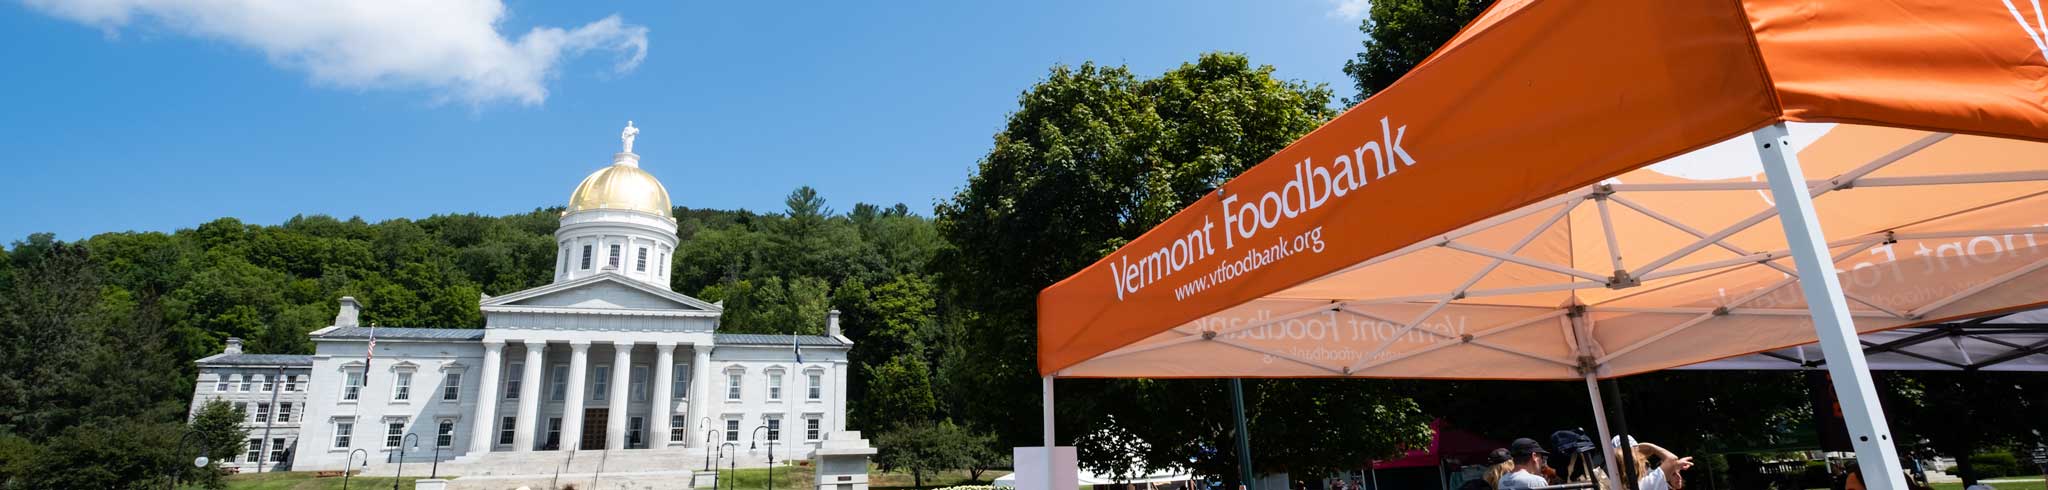 Photo of the Vermont State House and a Vermont Foodbank tent in the foreground.